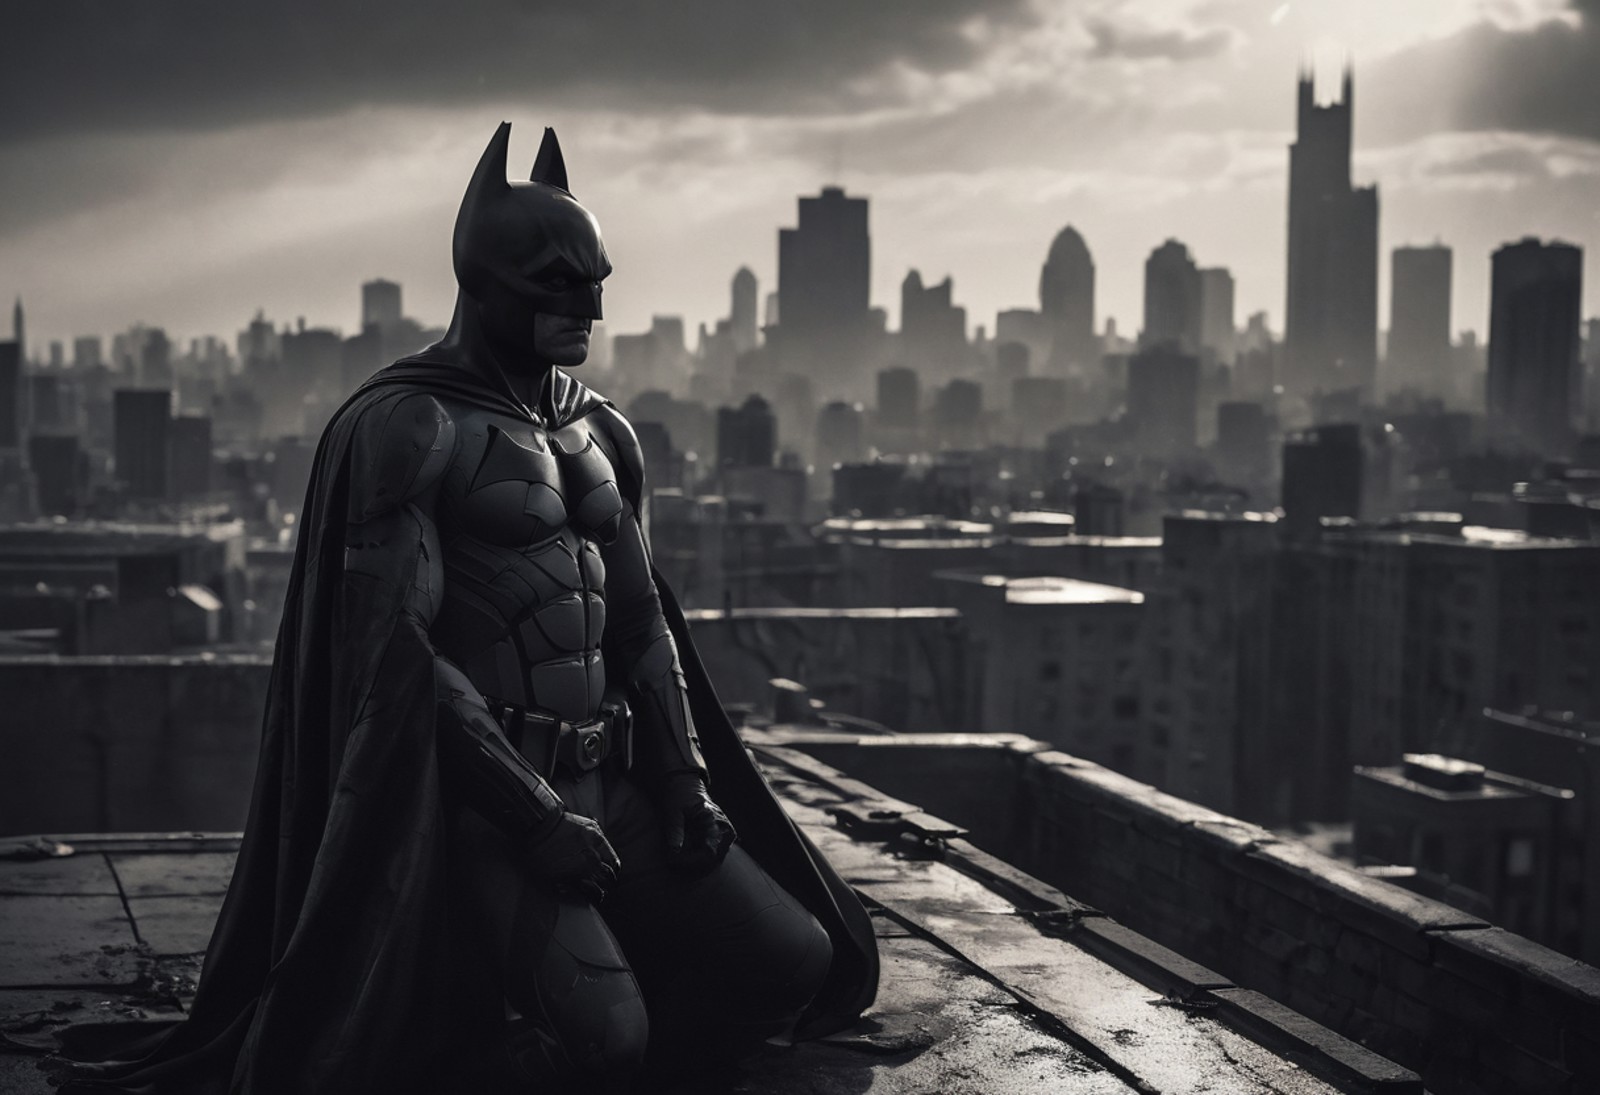 A cinematic photograph capturing the iconic silhouette of Batman perched atop a Gotham City rooftop, inspired by the dark ...